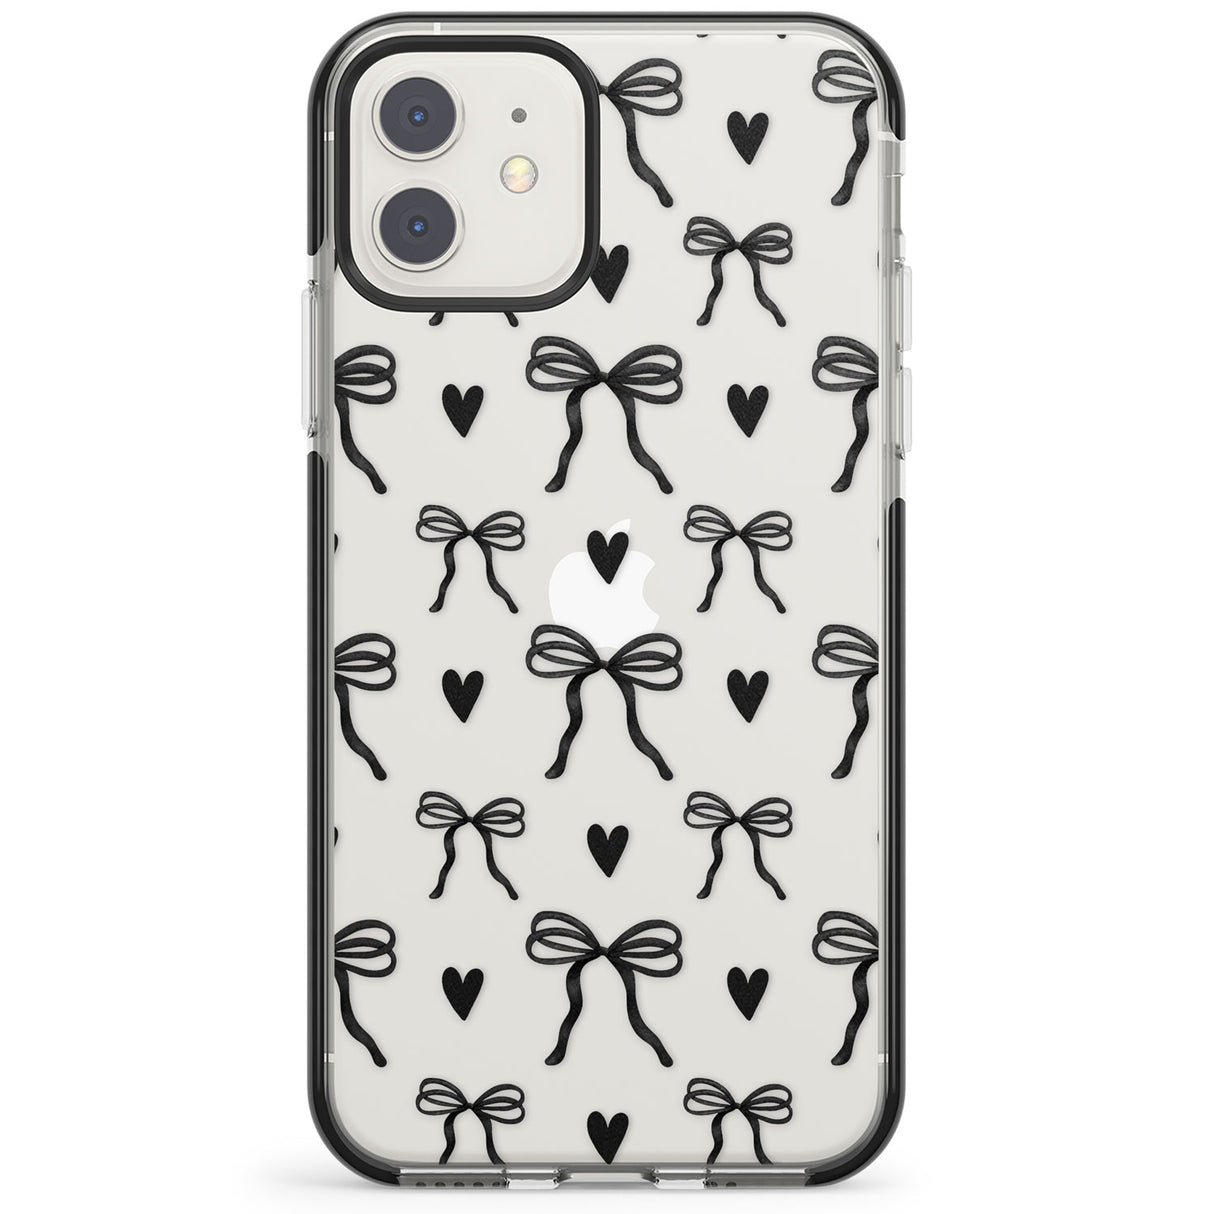 Black Bows & Hearts Impact Phone Case for iPhone 11, iphone 12